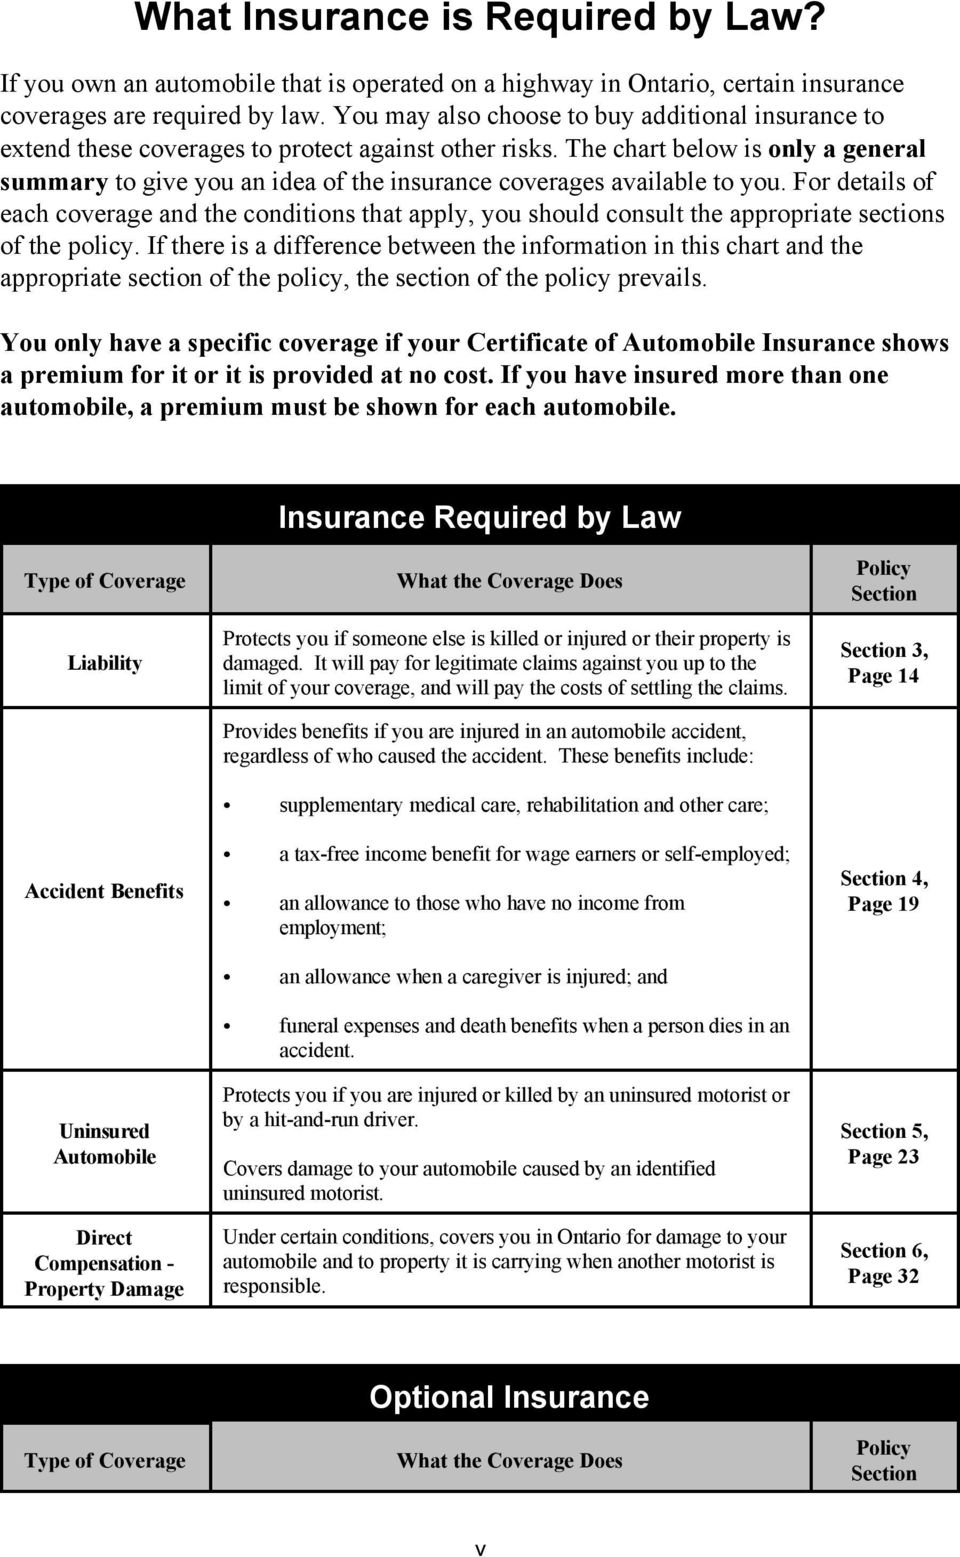 The chart below is only a general summary to give you an idea of the insurance coverages available to you.